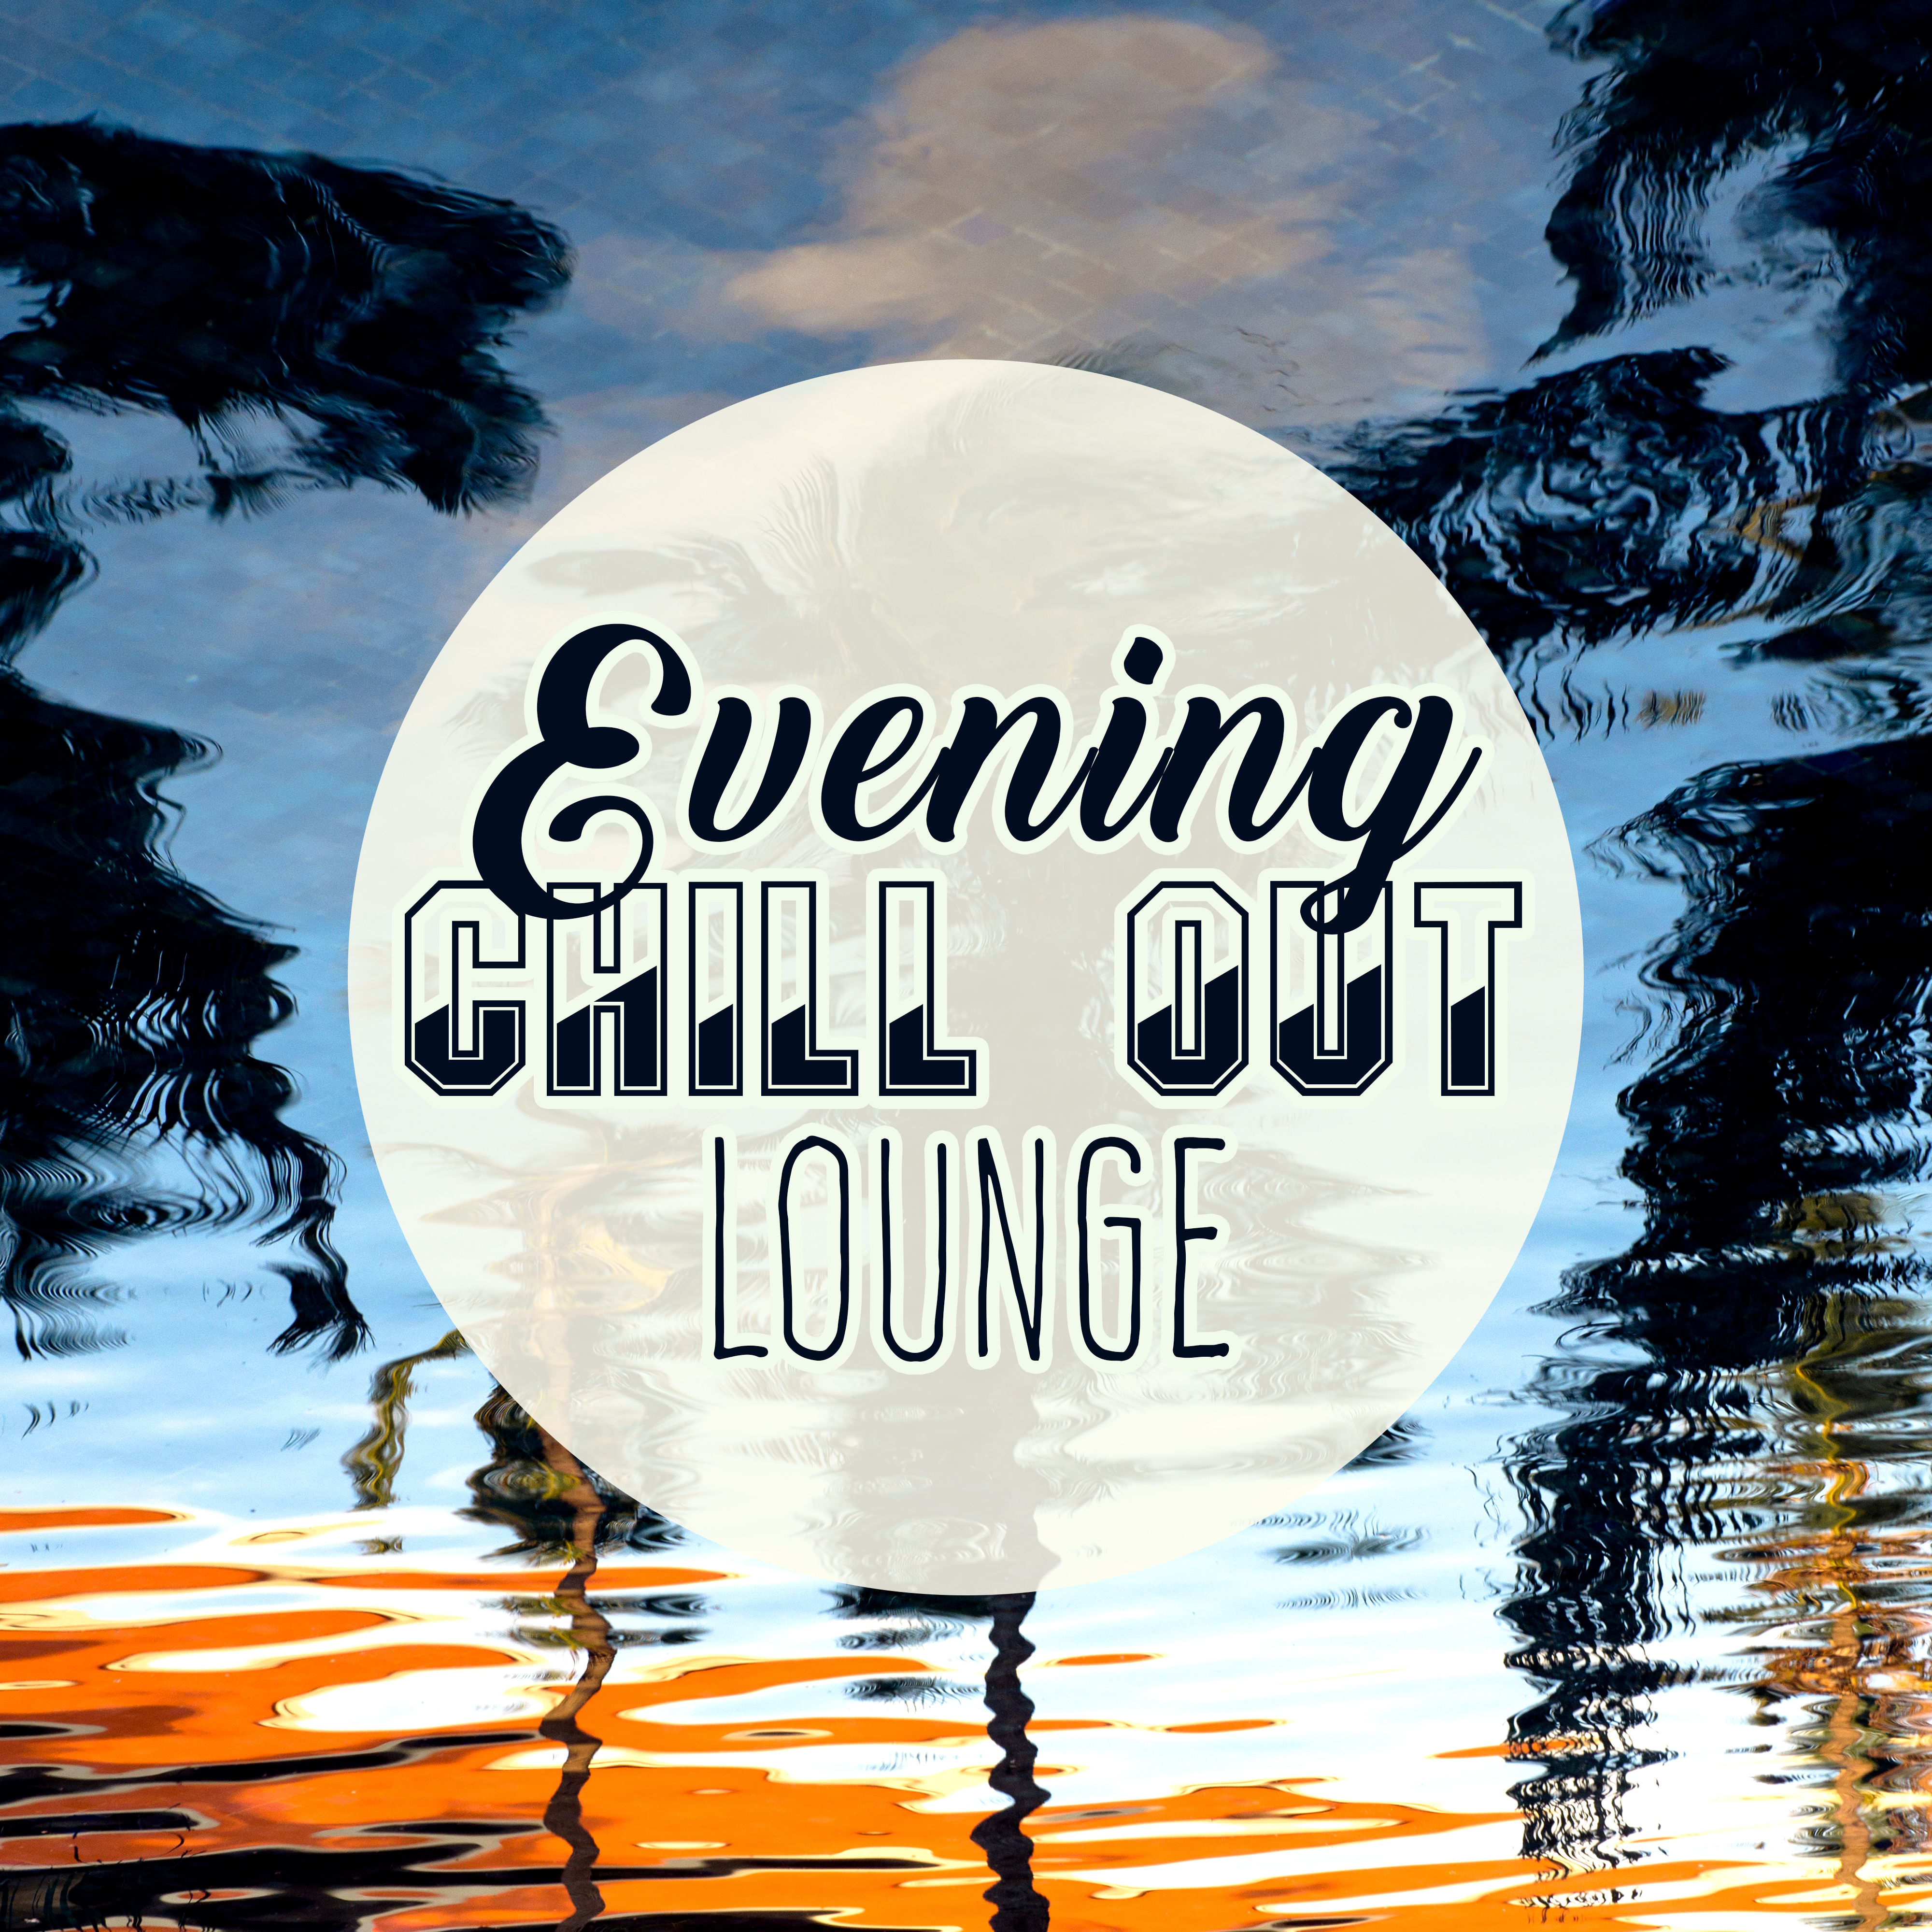 Evening Chill Out Lounge